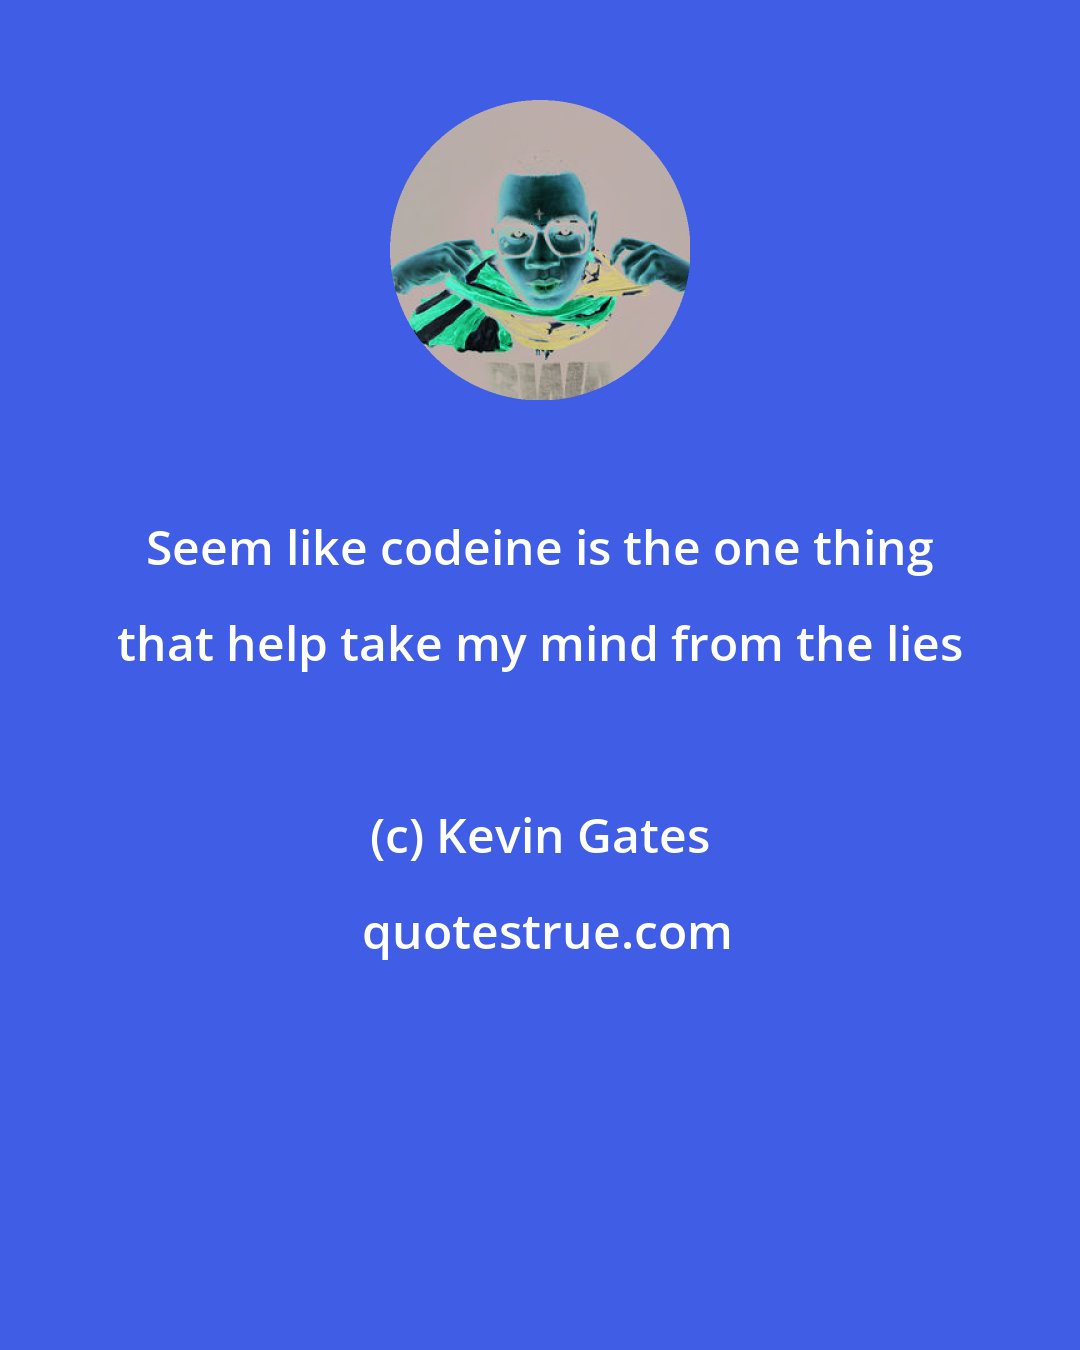 Kevin Gates: Seem like codeine is the one thing that help take my mind from the lies